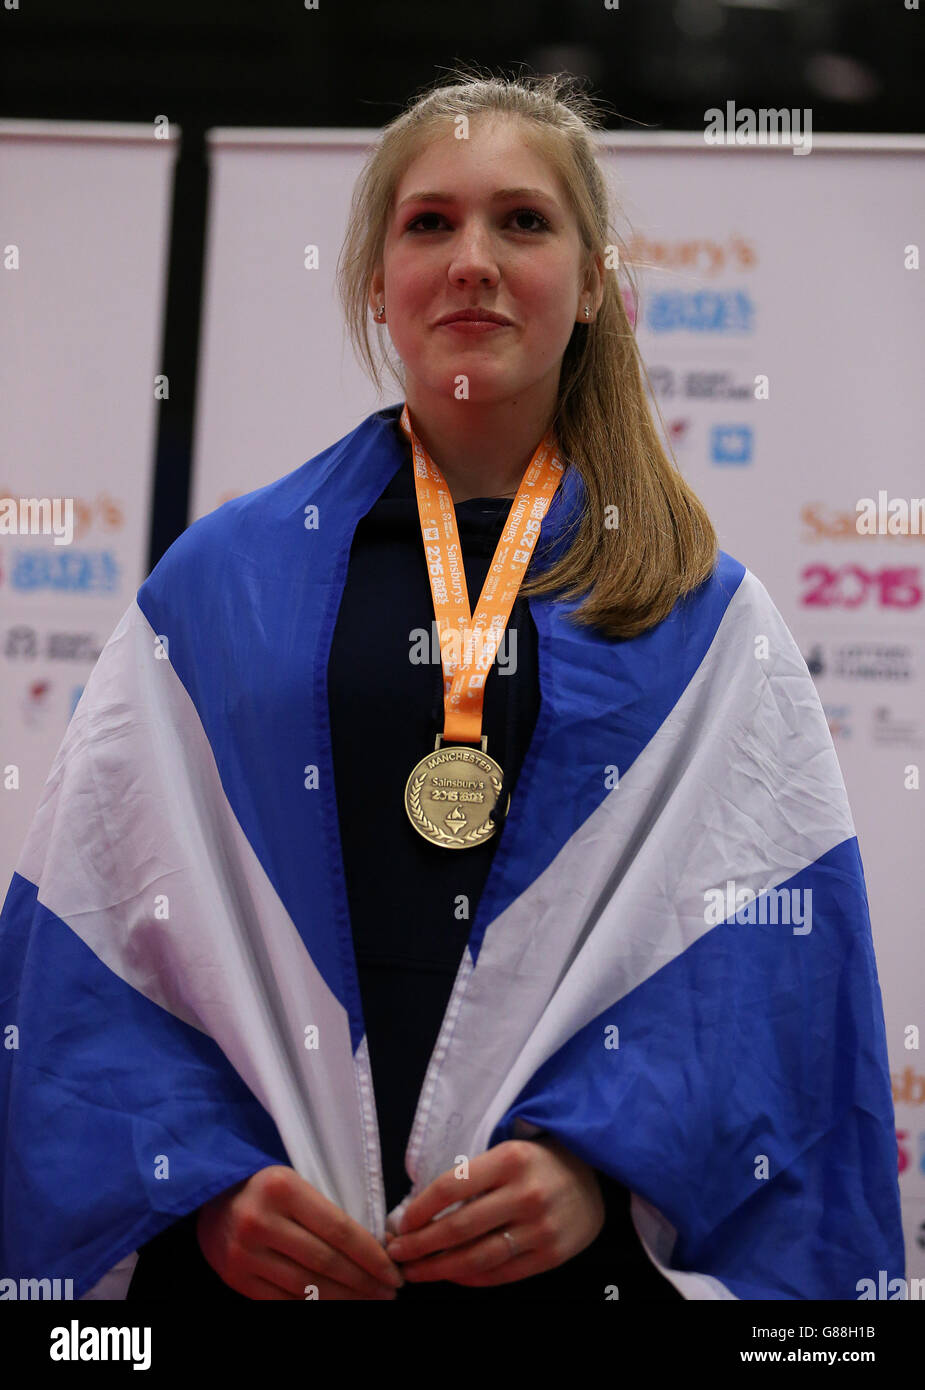 Scotland's Jessica Corby with her gold medal after winning the Women's Sabre Final at the fencing during the Sainsbury's 2015 School Games in Manchester. PRESS ASSOCIATION Photo. Picture date: Saturday September 5, 2015. Photo credit should read: Steven Paston/PA Wire Stock Photo